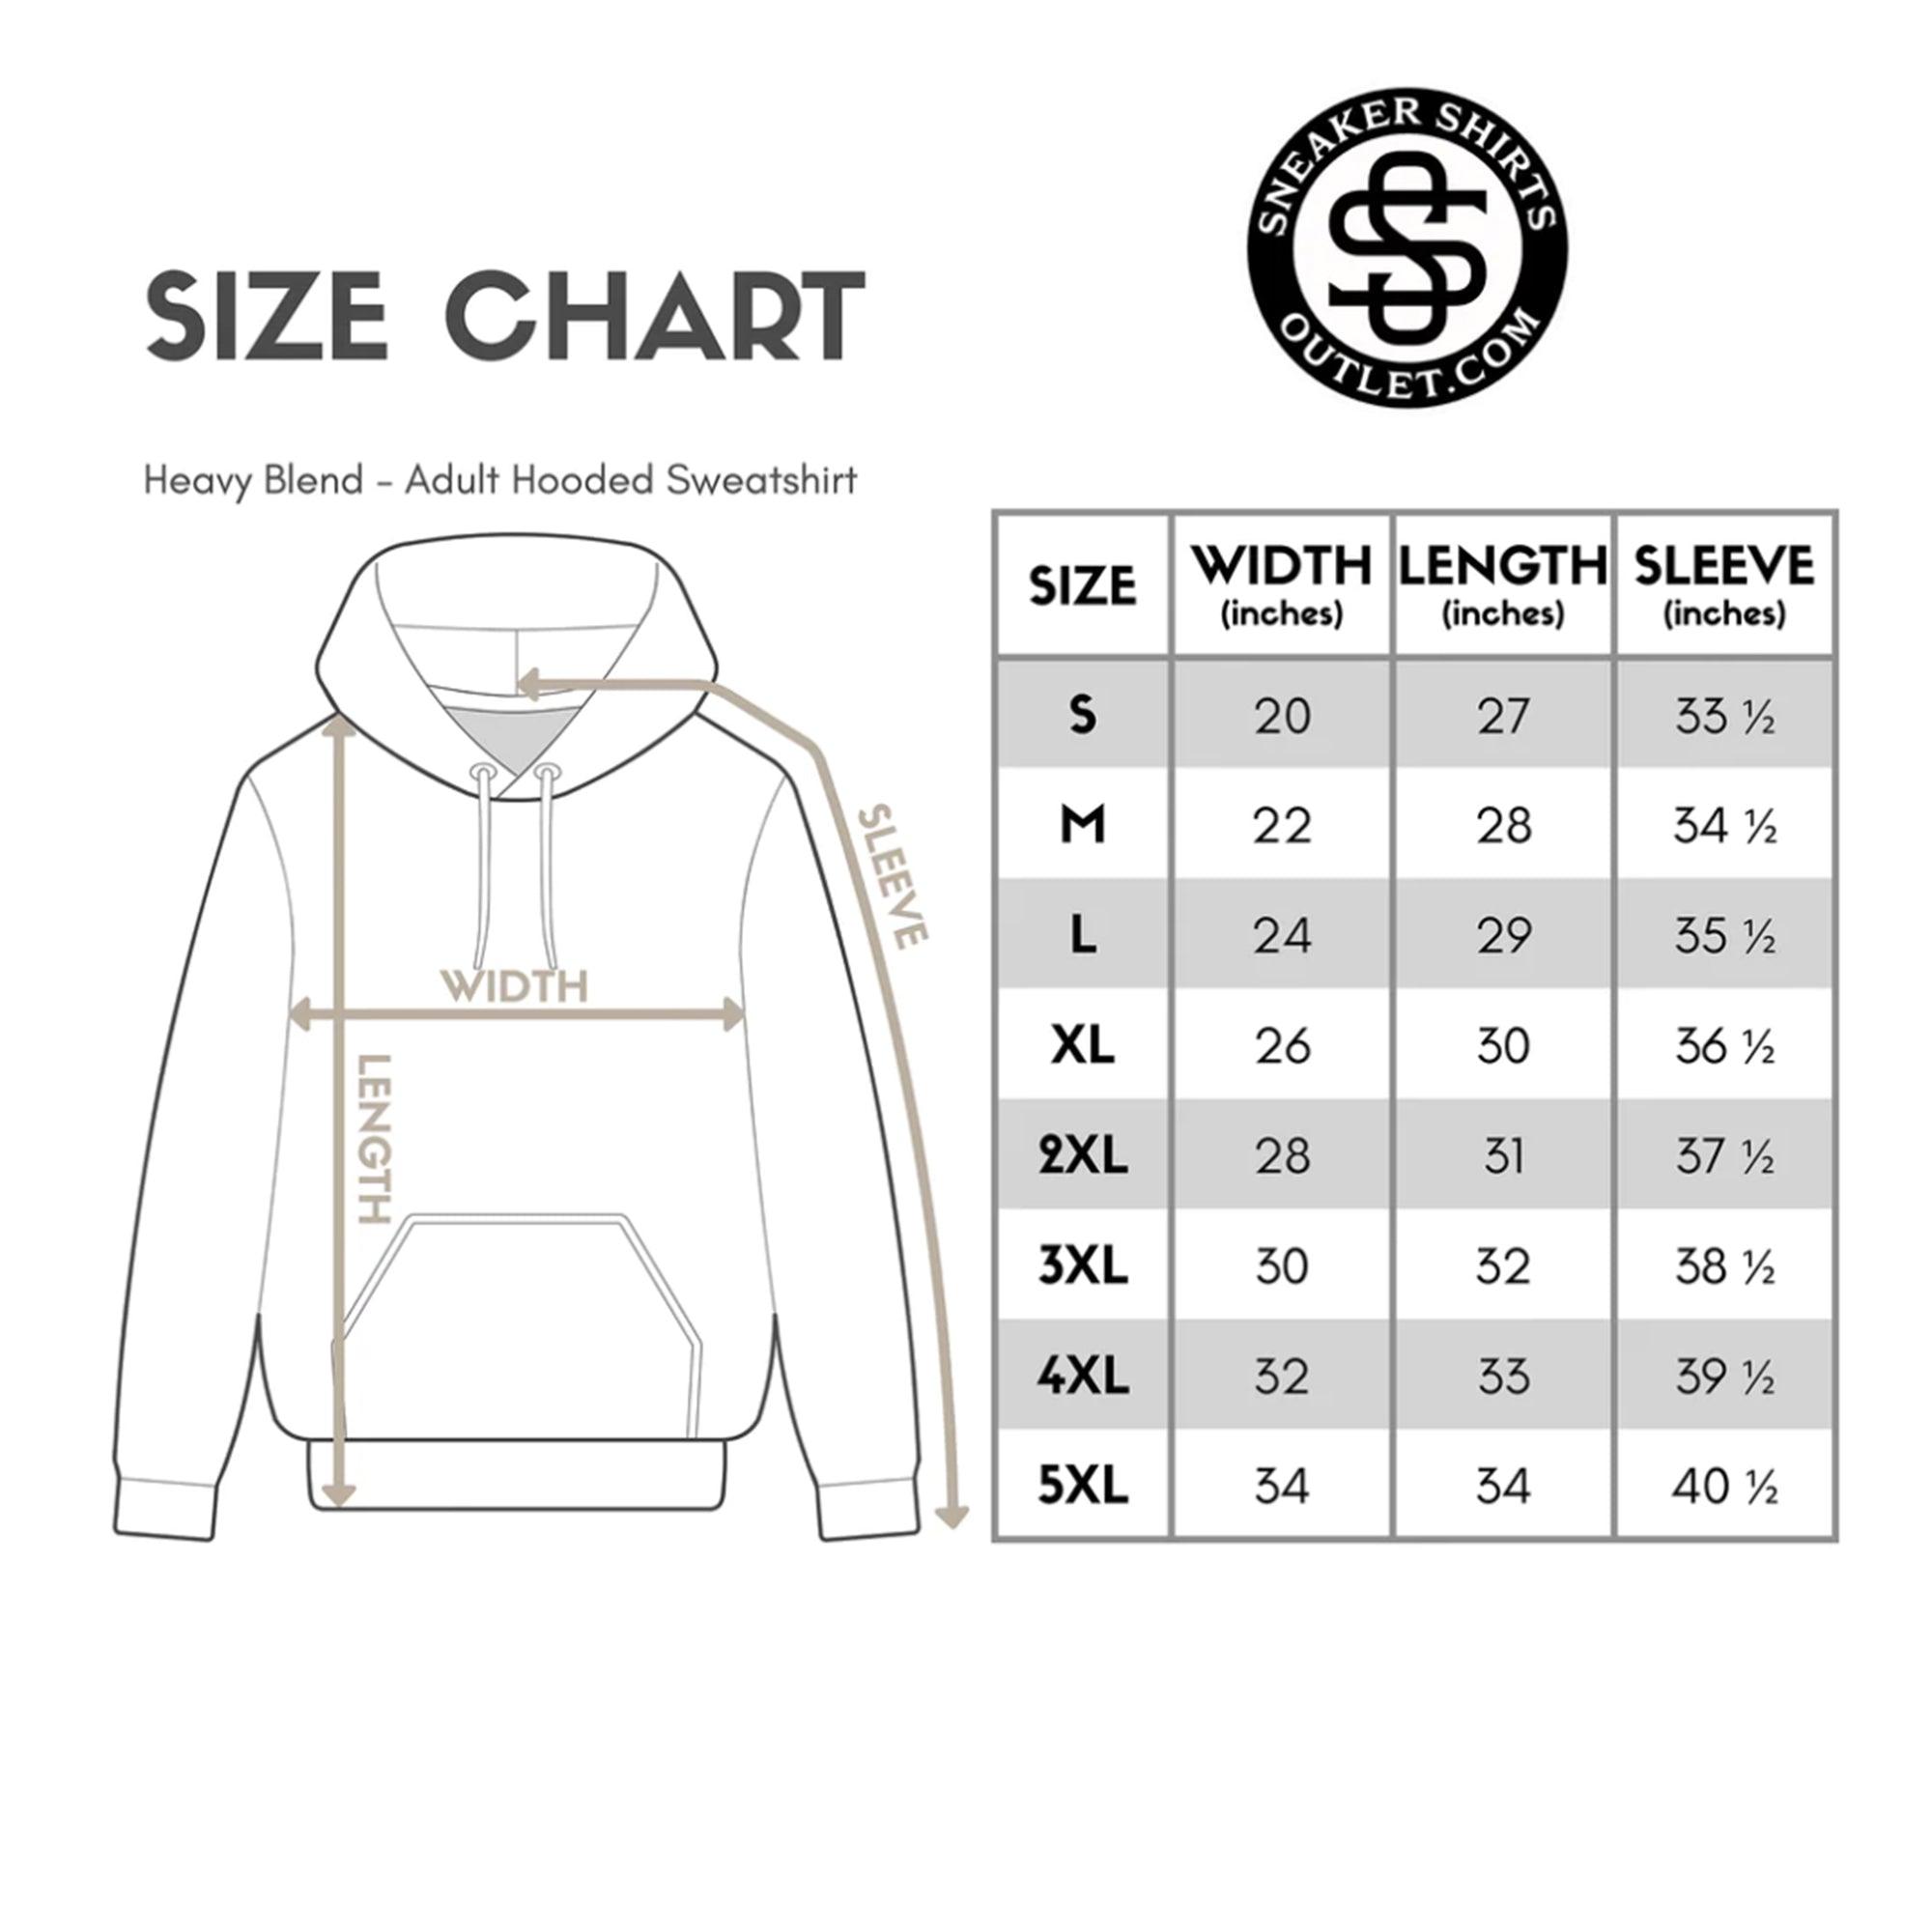 size chart Success Nutrition Hoodie Nike Air Foamposite One Blud Void Rugged Orange photo